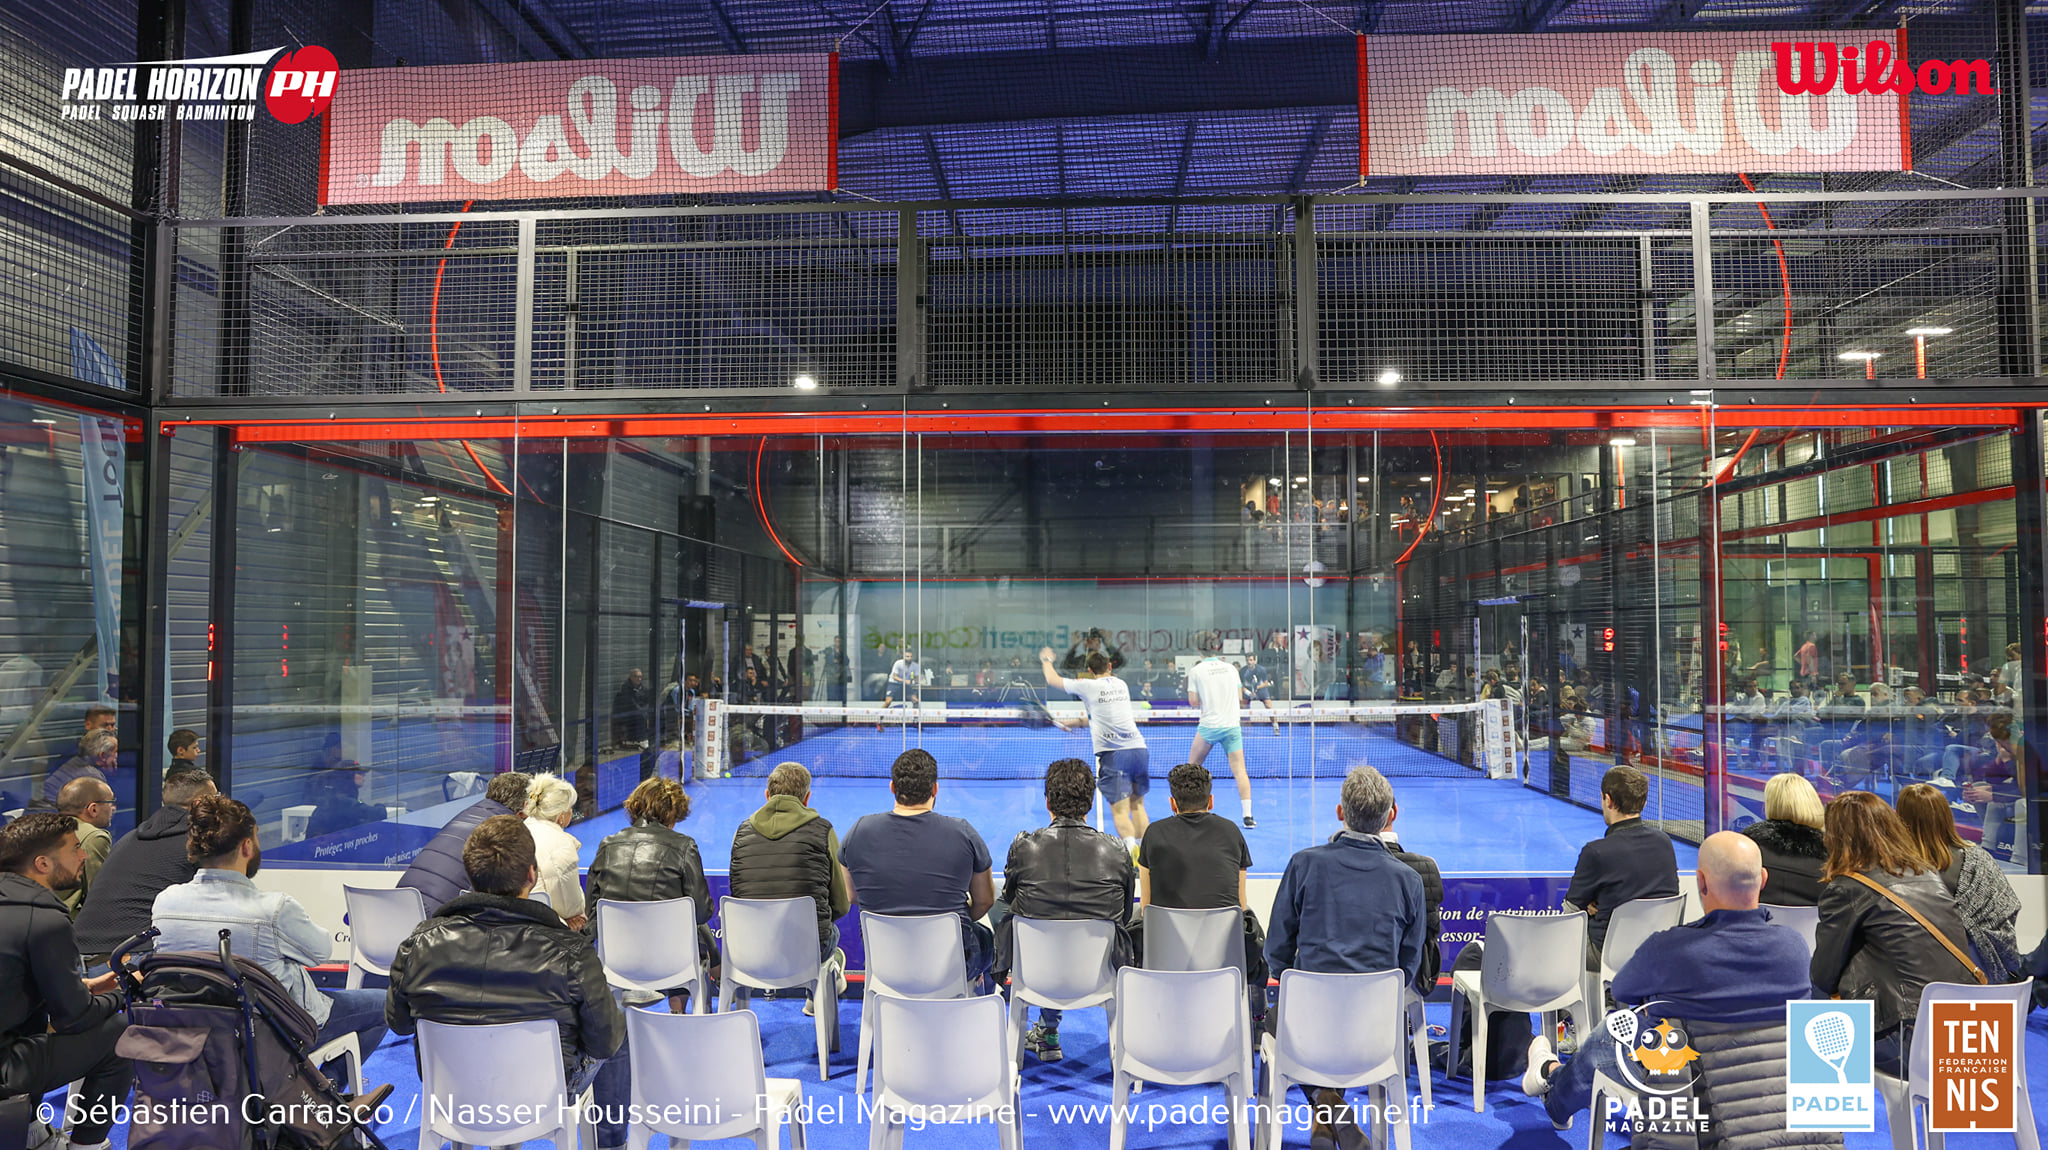 P2000 Padel Horizon: all the results and rankings